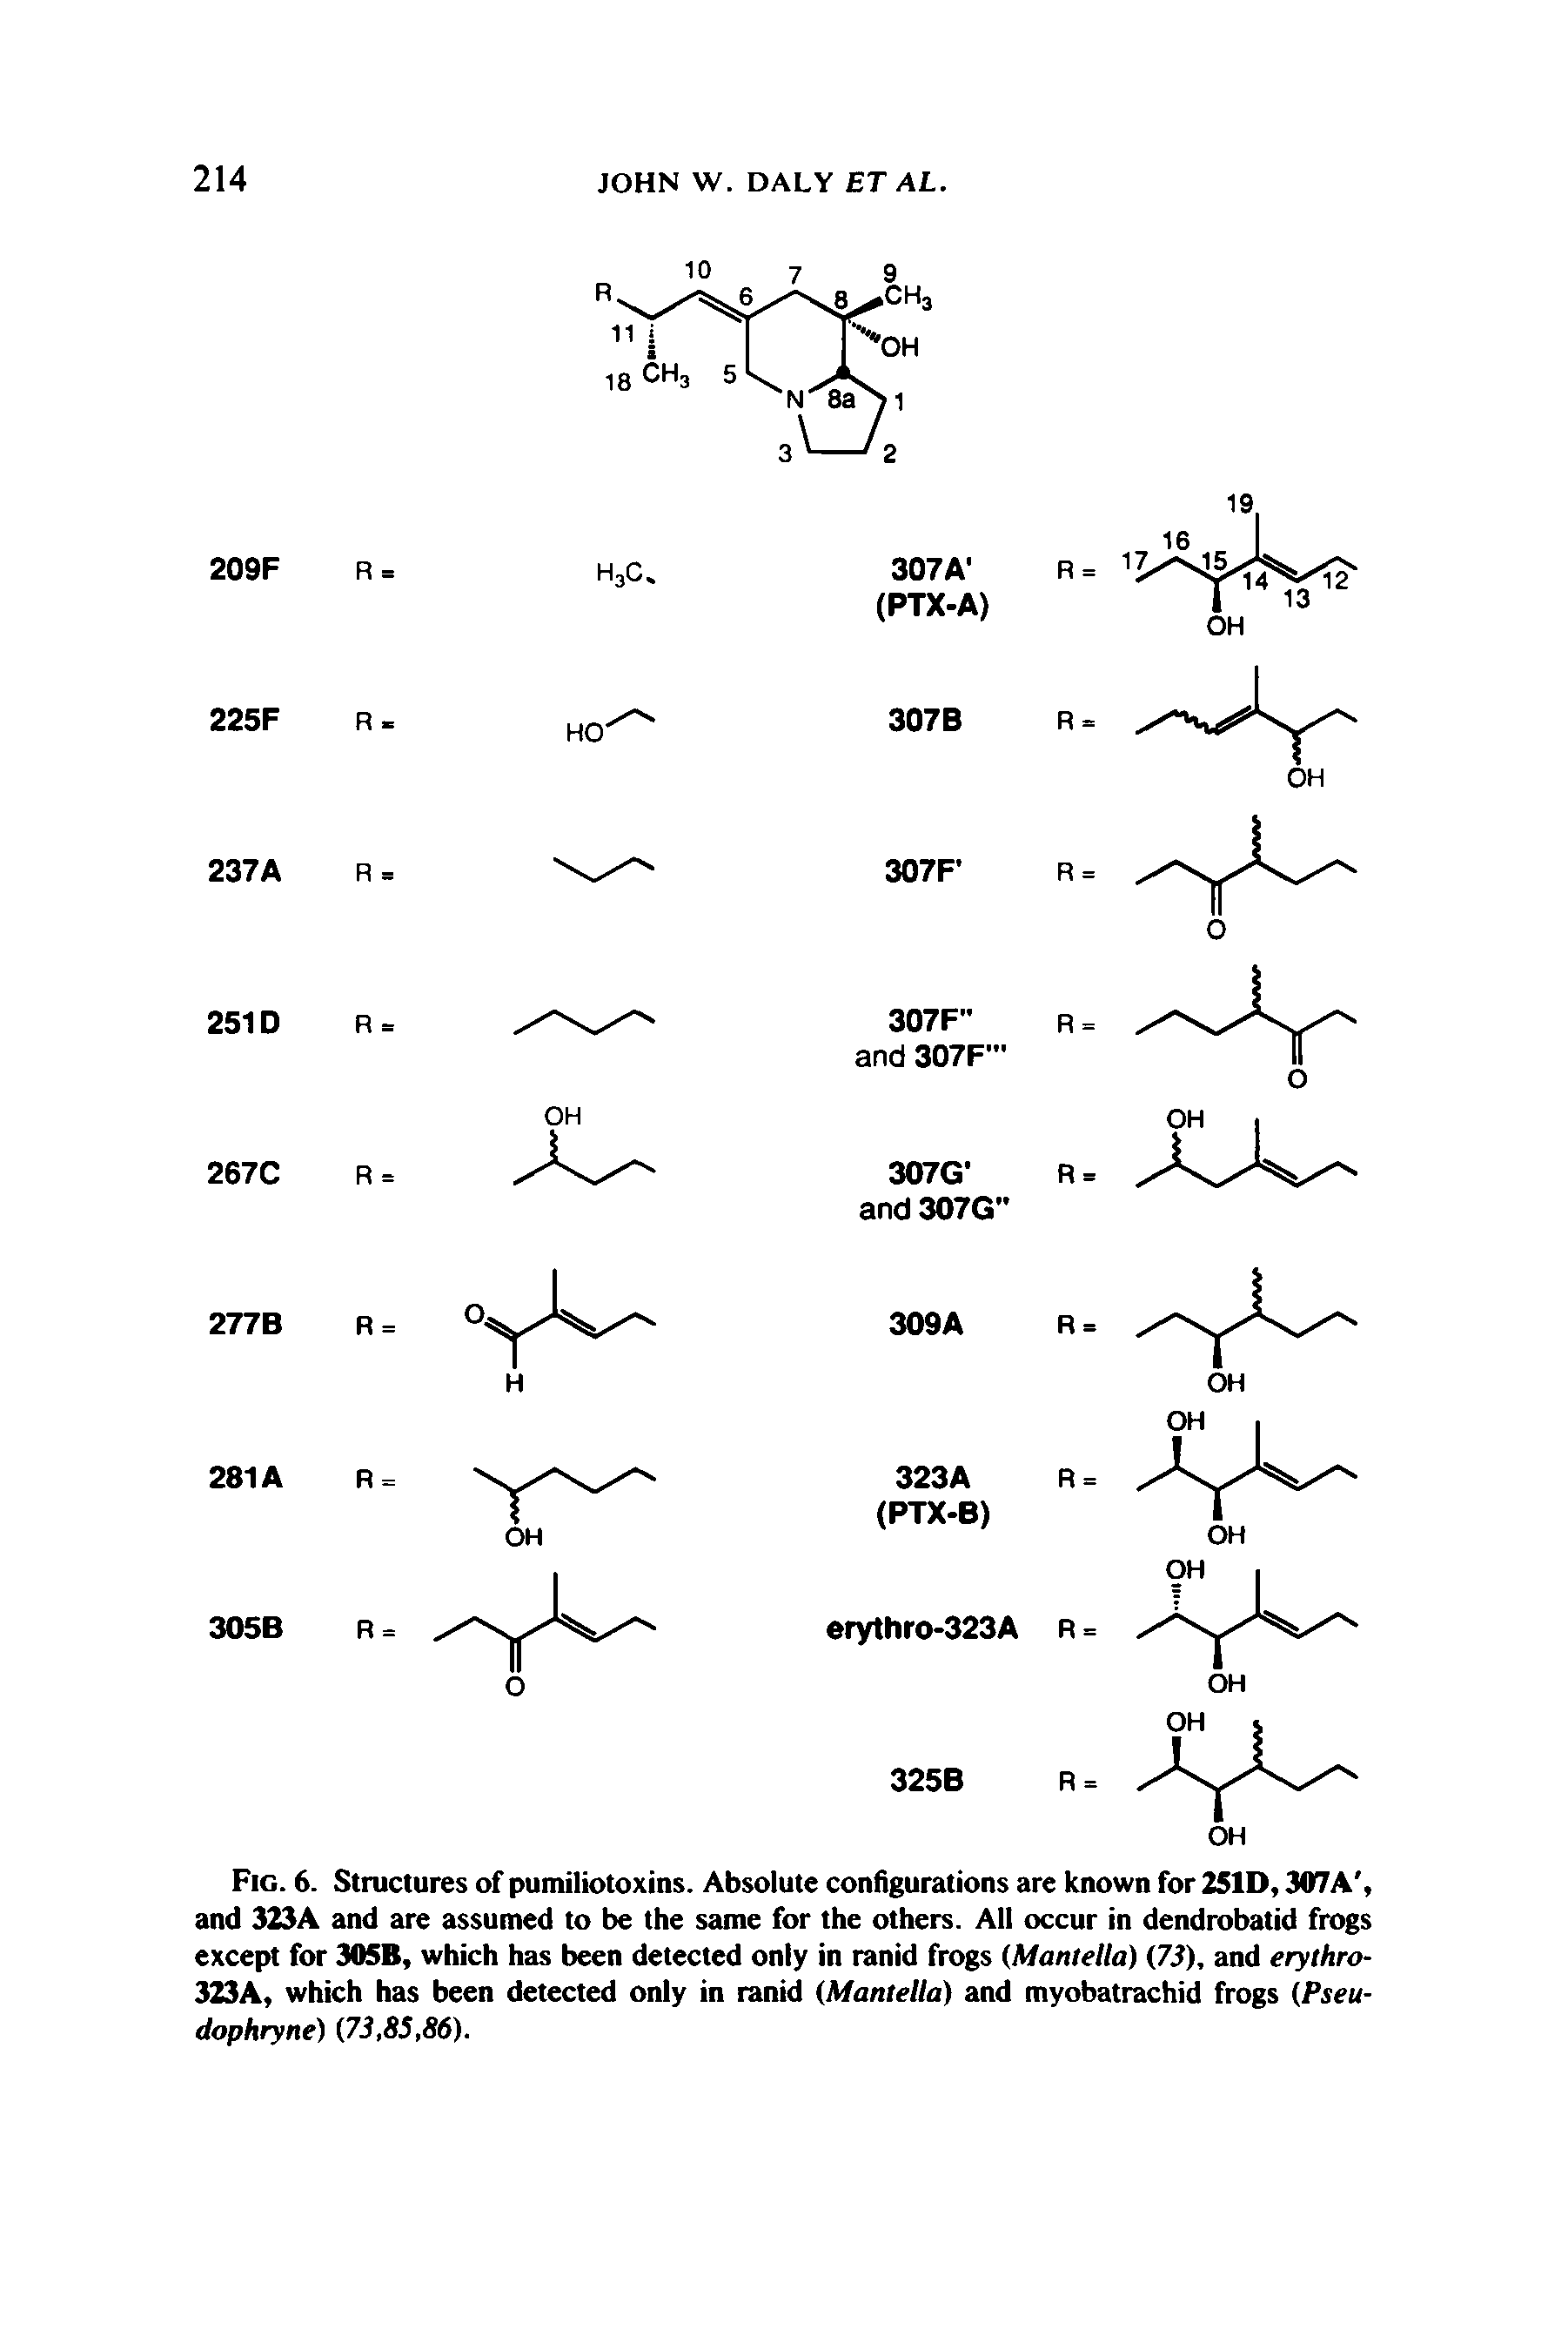 Fig. 6. Structures of pumiliotoxins. Absolute configurations are known for 251D, 307A, and 323A and are assumed to be the same for the others. All occur in dendrobatid frogs except for 3QSB, which has been delected only in ranid frogs (Mantella) (73), and eryihro-323A, which has been detected only in ranid (Mantella) and myobatrachid frogs (Pseu-dophryne) (73,85,86).